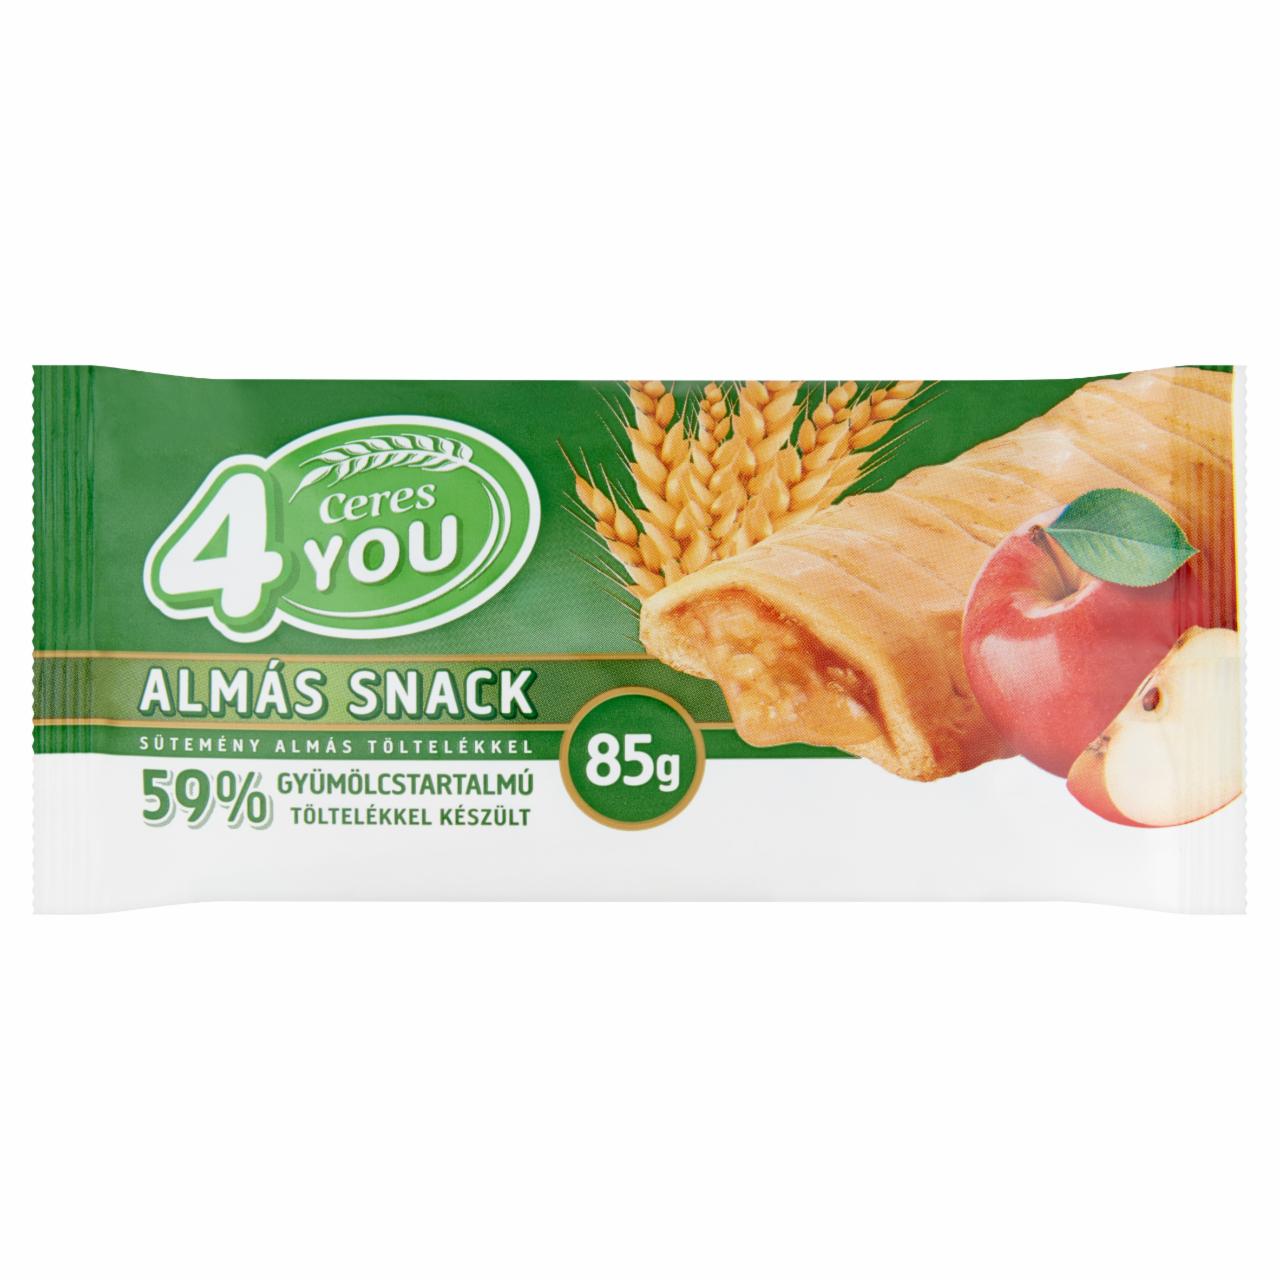 Photo - Ceres 4you Apple Snack-Cake with Apple Filling 85 g